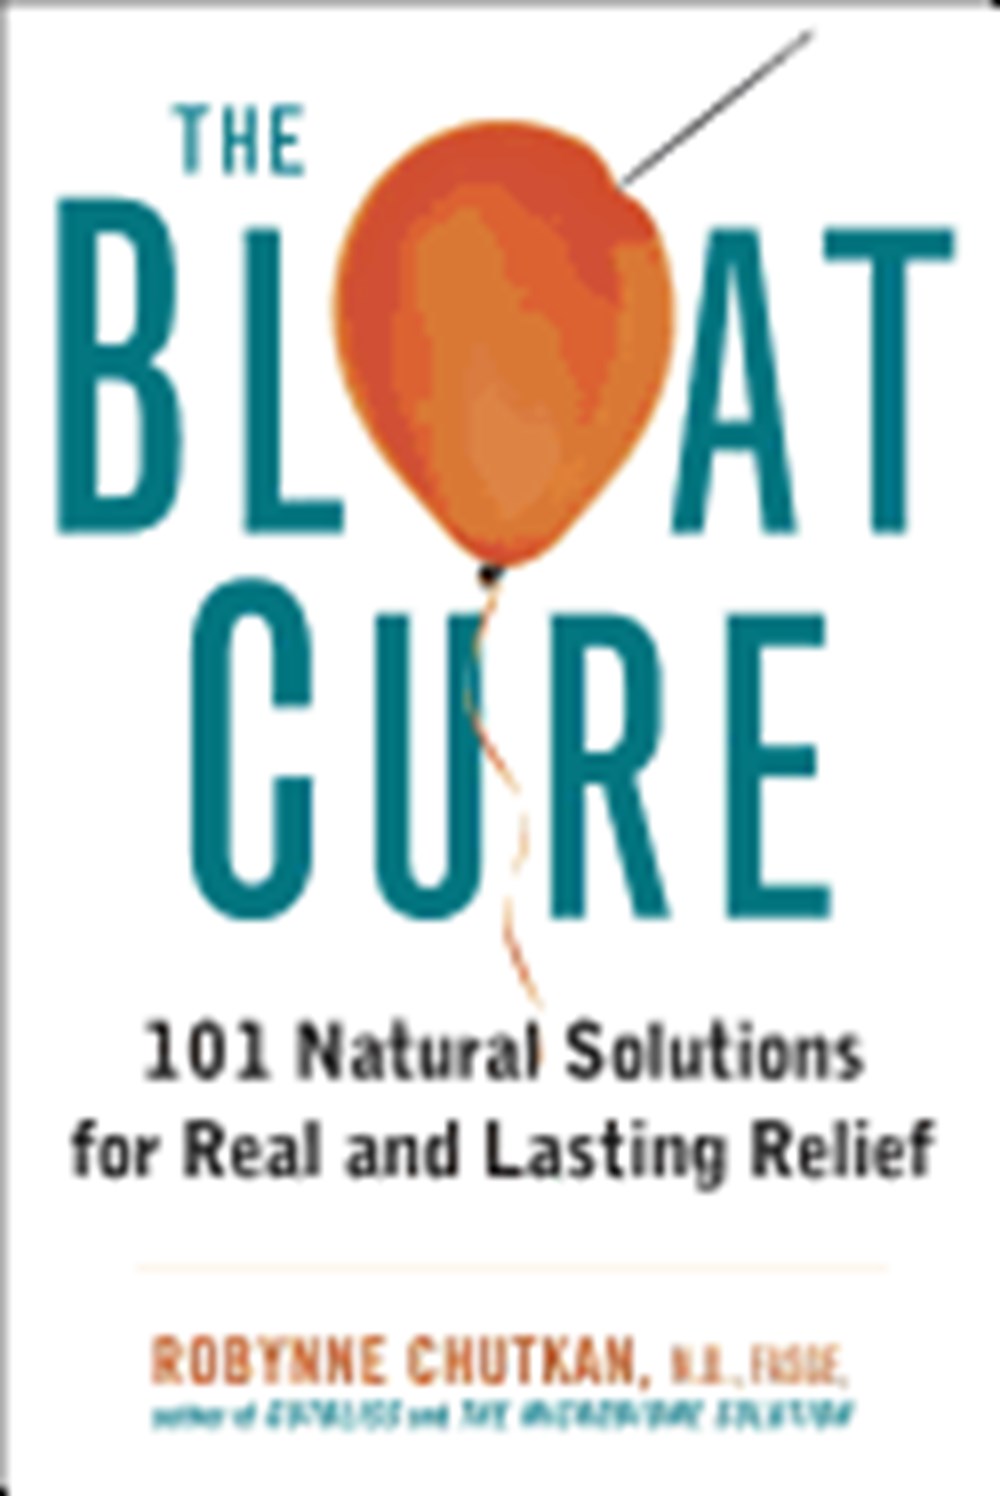 Bloat Cure: 101 Natural Solutions for Real and Lasting Relief